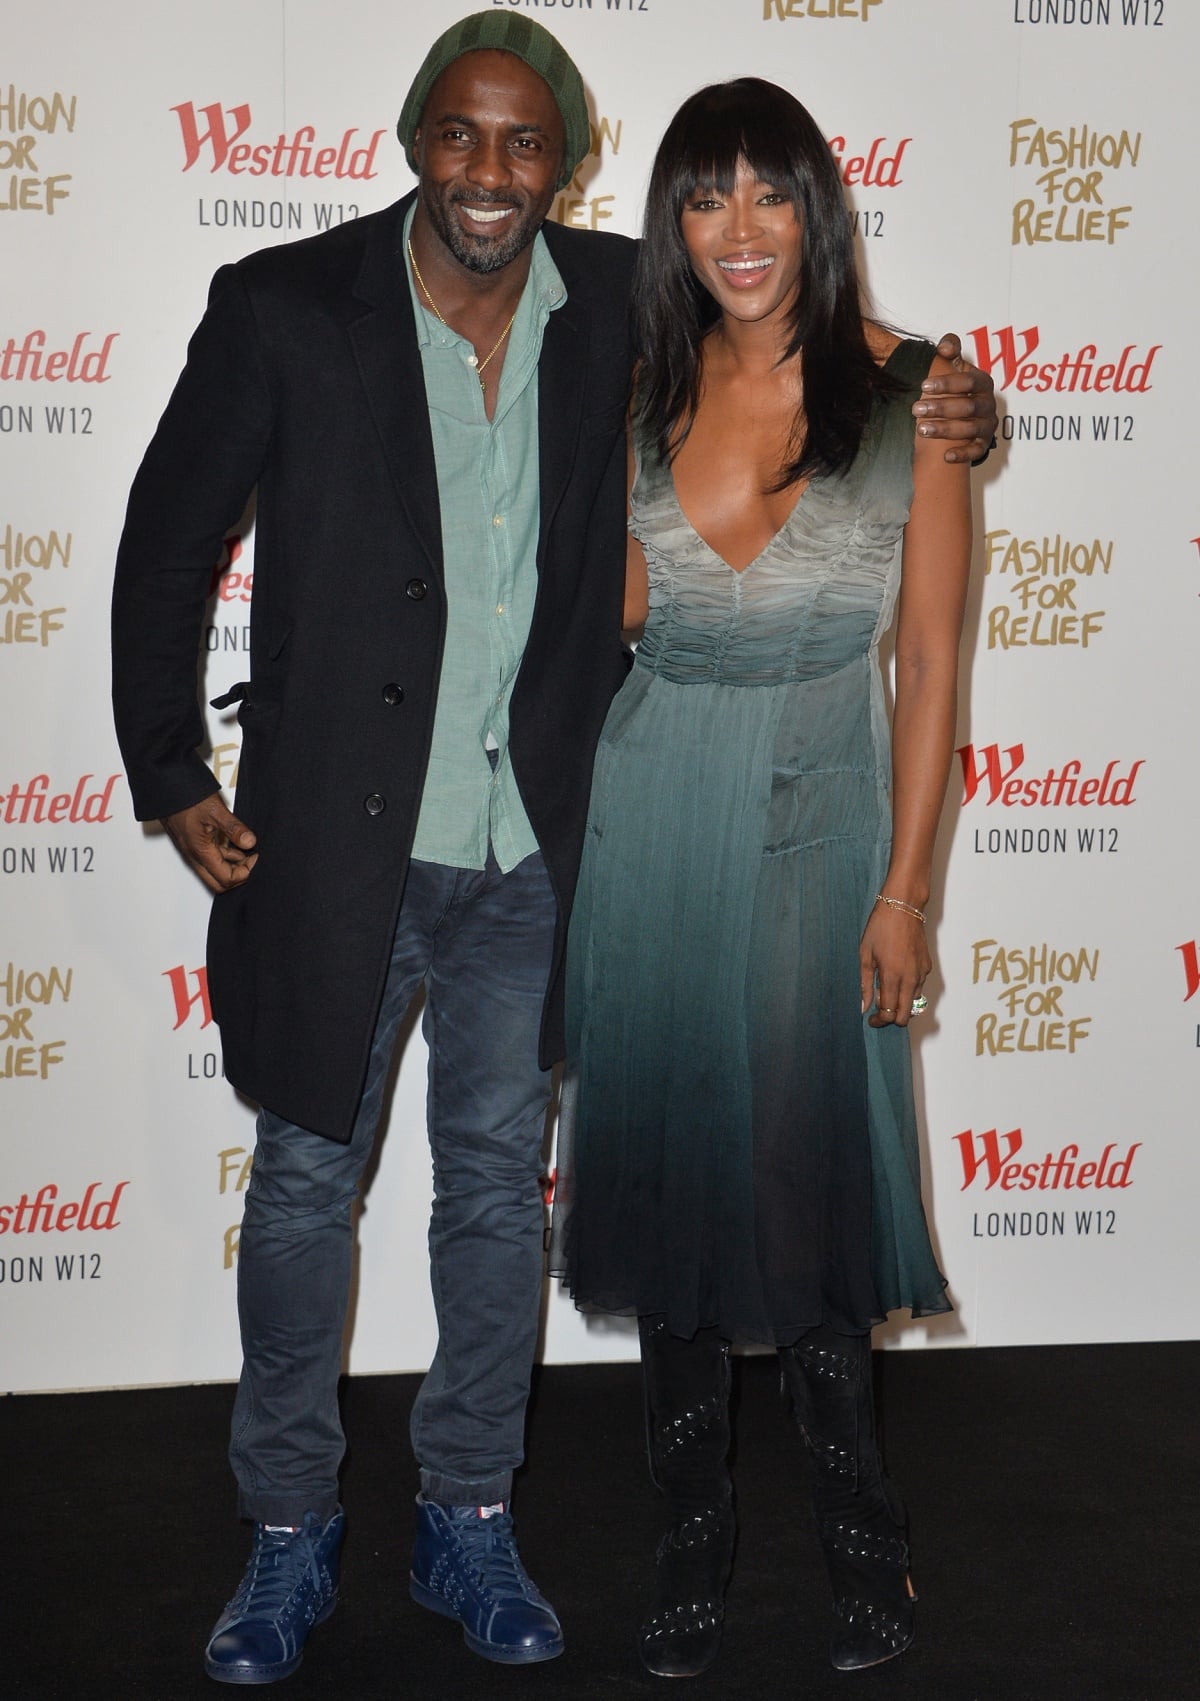 Rumors circulated about Idris Elba’s involvement with supermodel Naomi Campbell